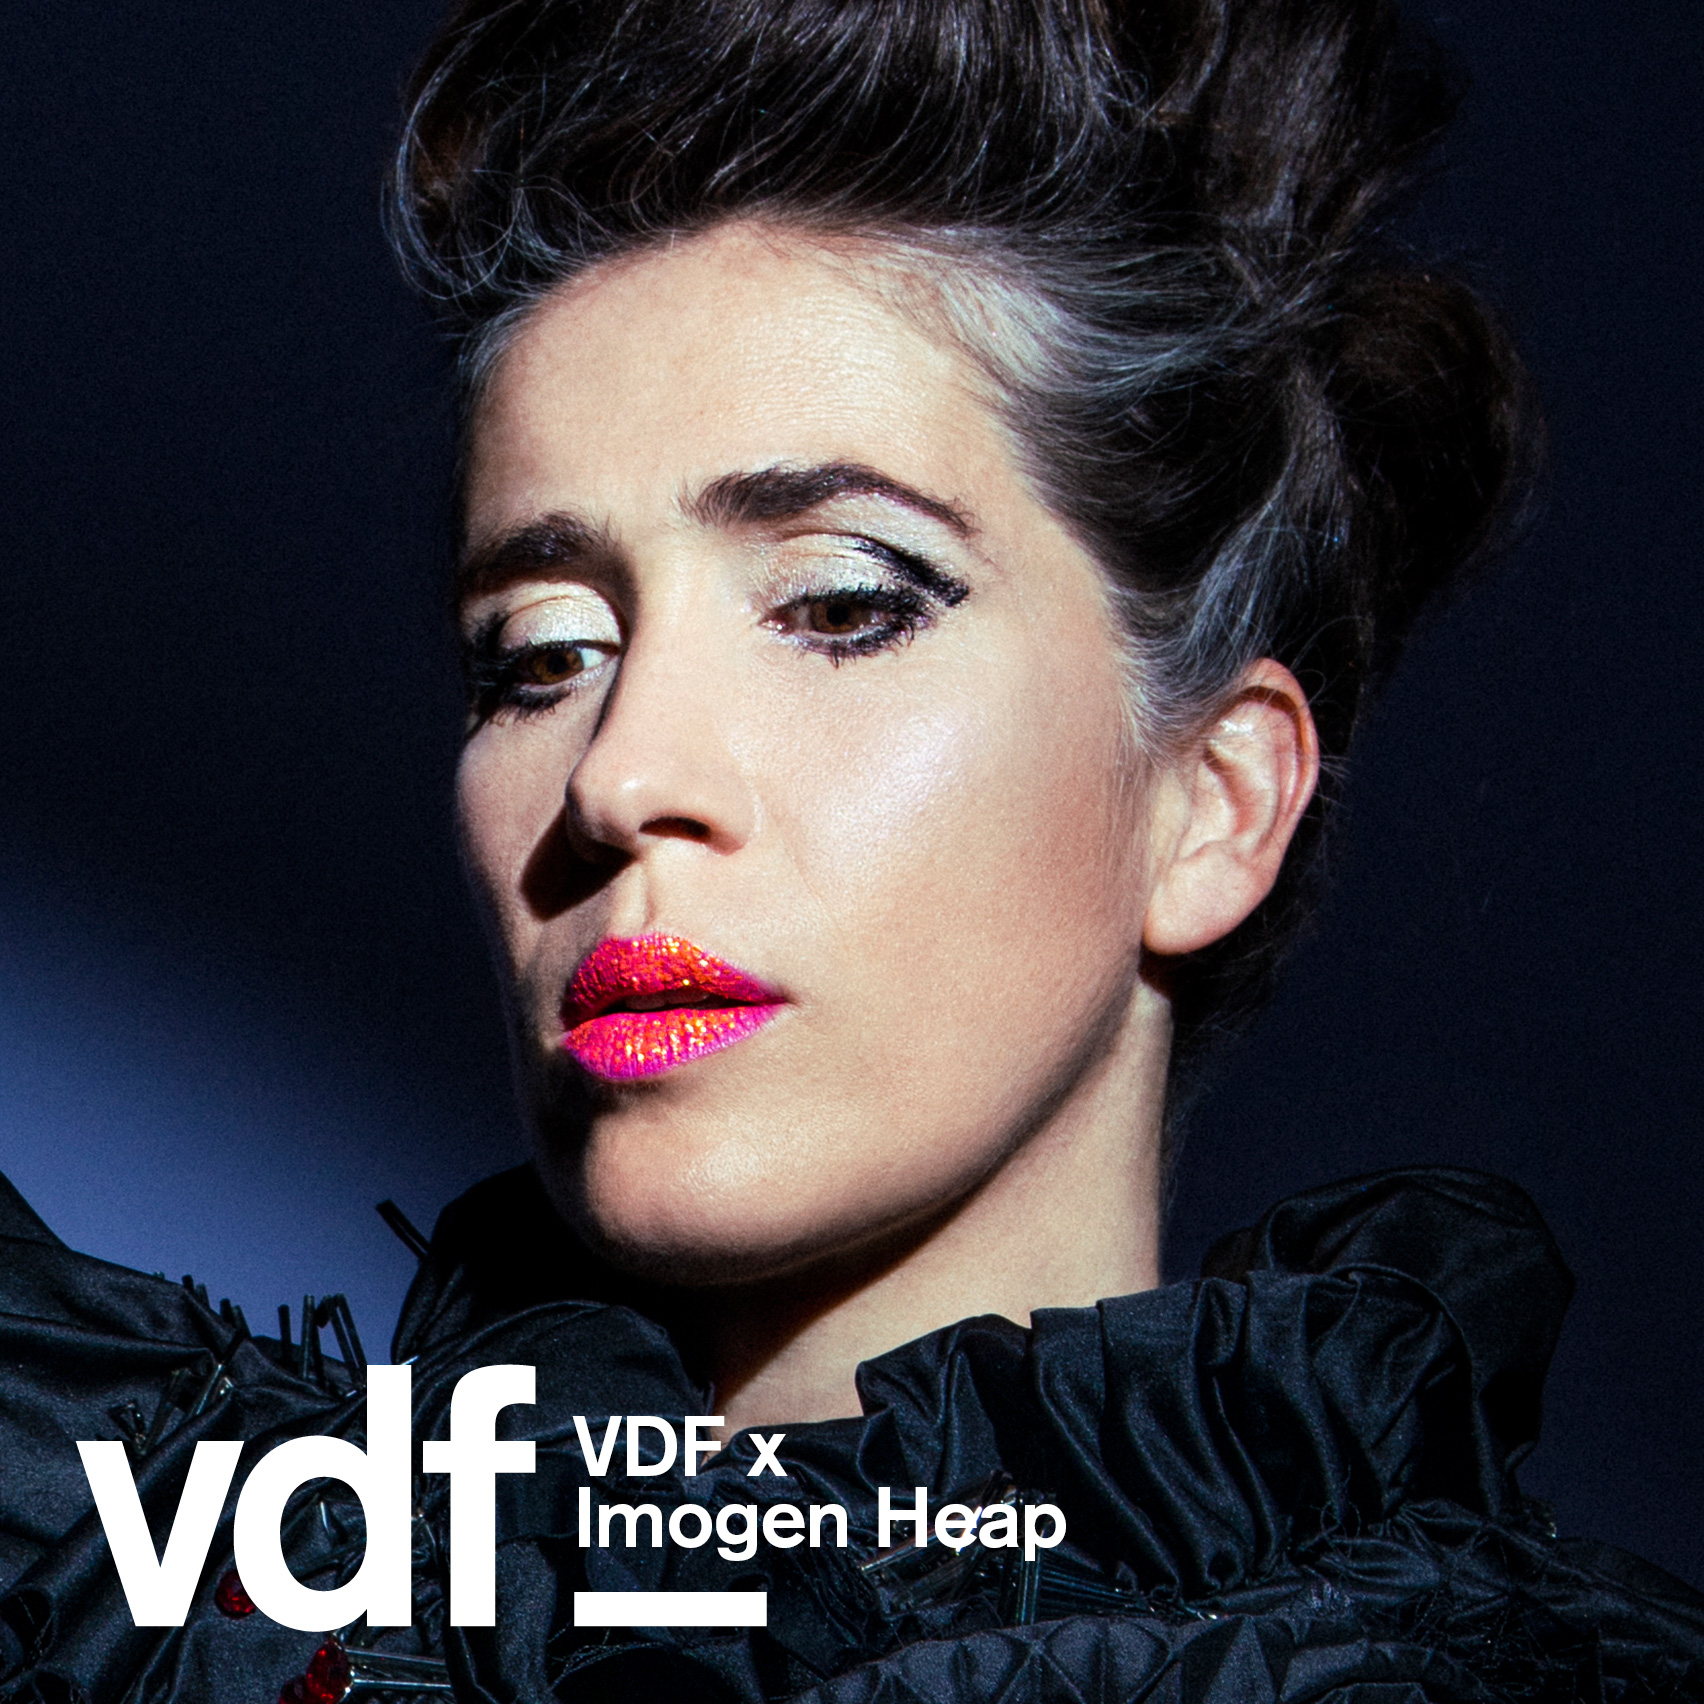 This week's VDF highlights include Lucy McRae and Imogen Heap